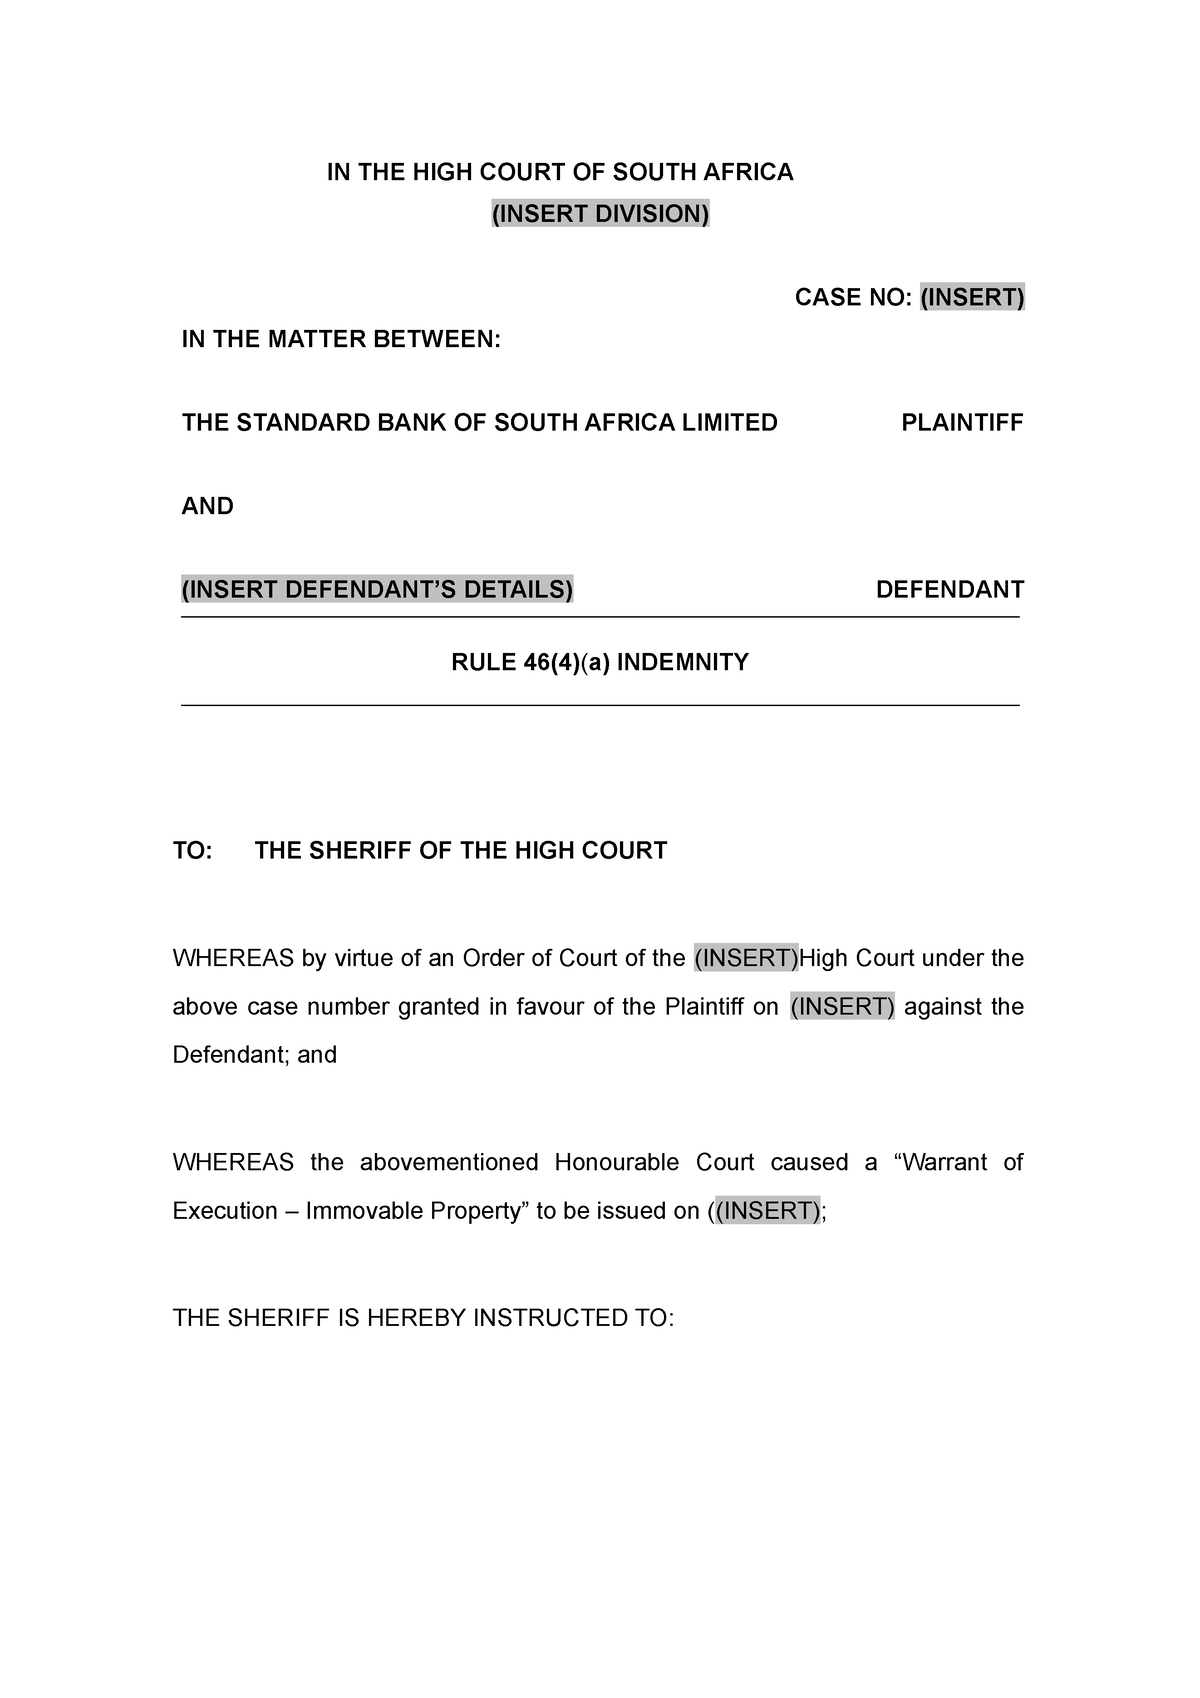 Sheriff Indemnity Amended In The High Court Of South Africa Insert Division Case No 2781